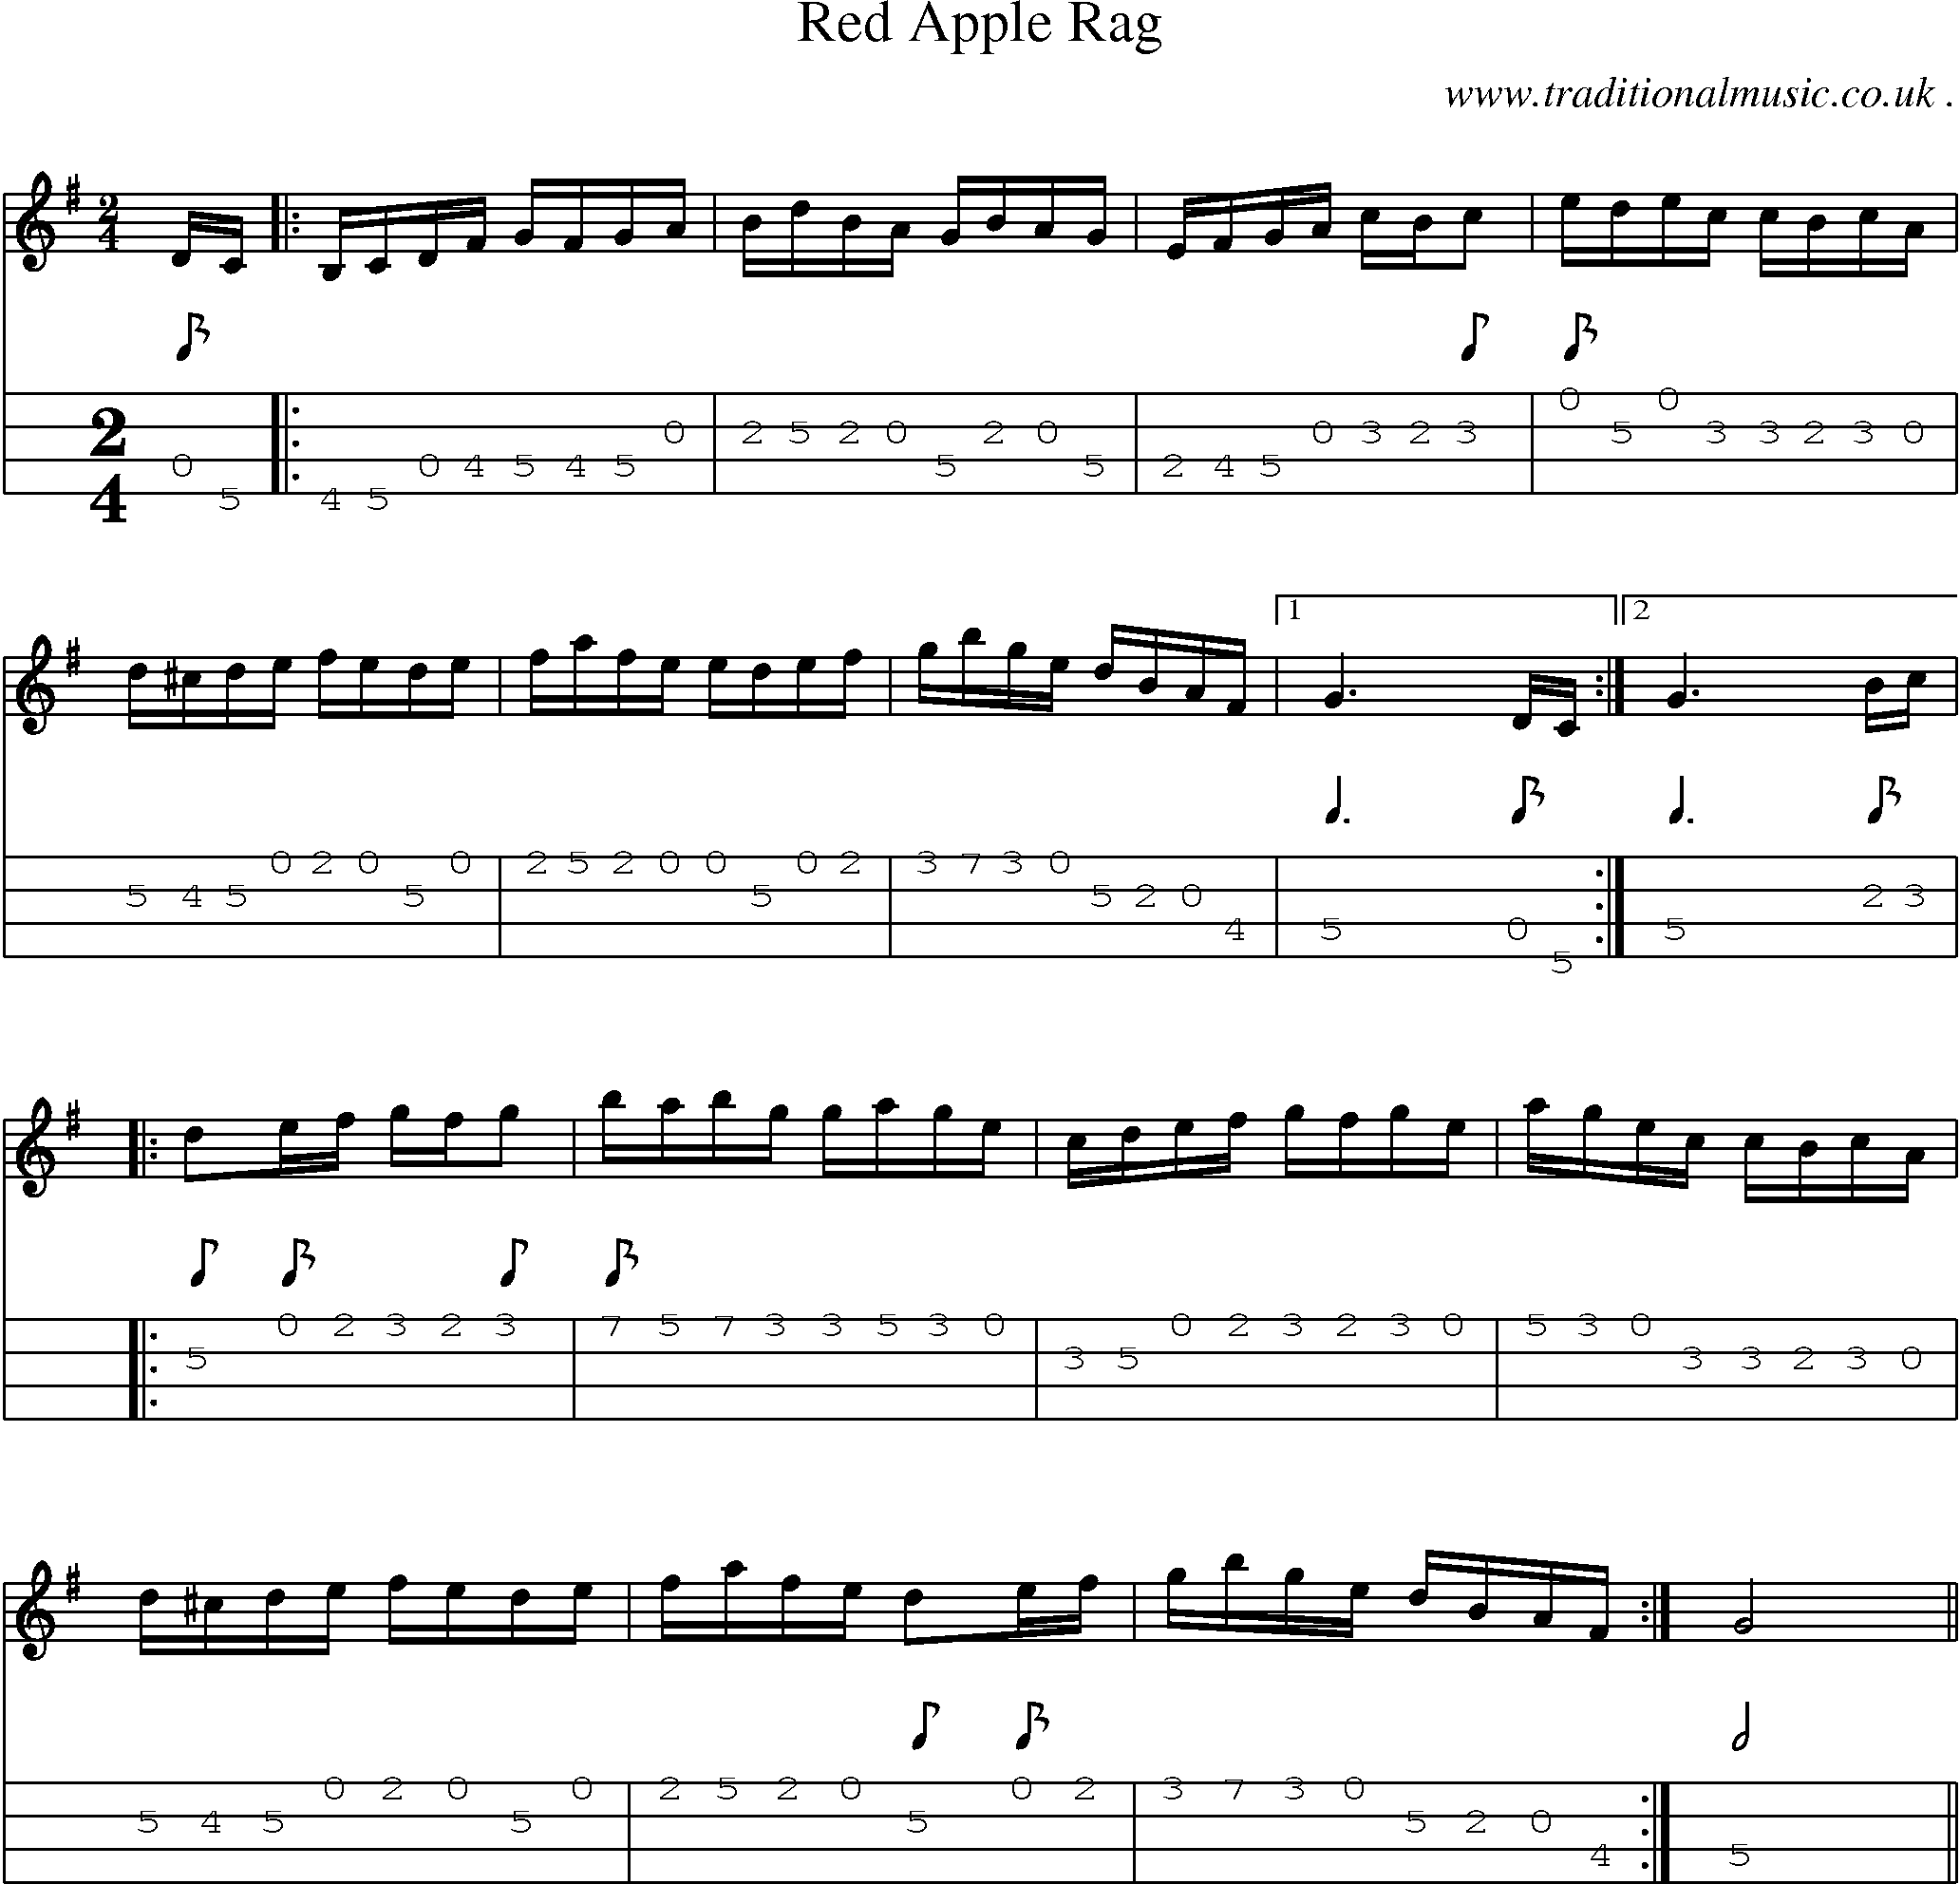 Music Score and Guitar Tabs for Red Apple Rag